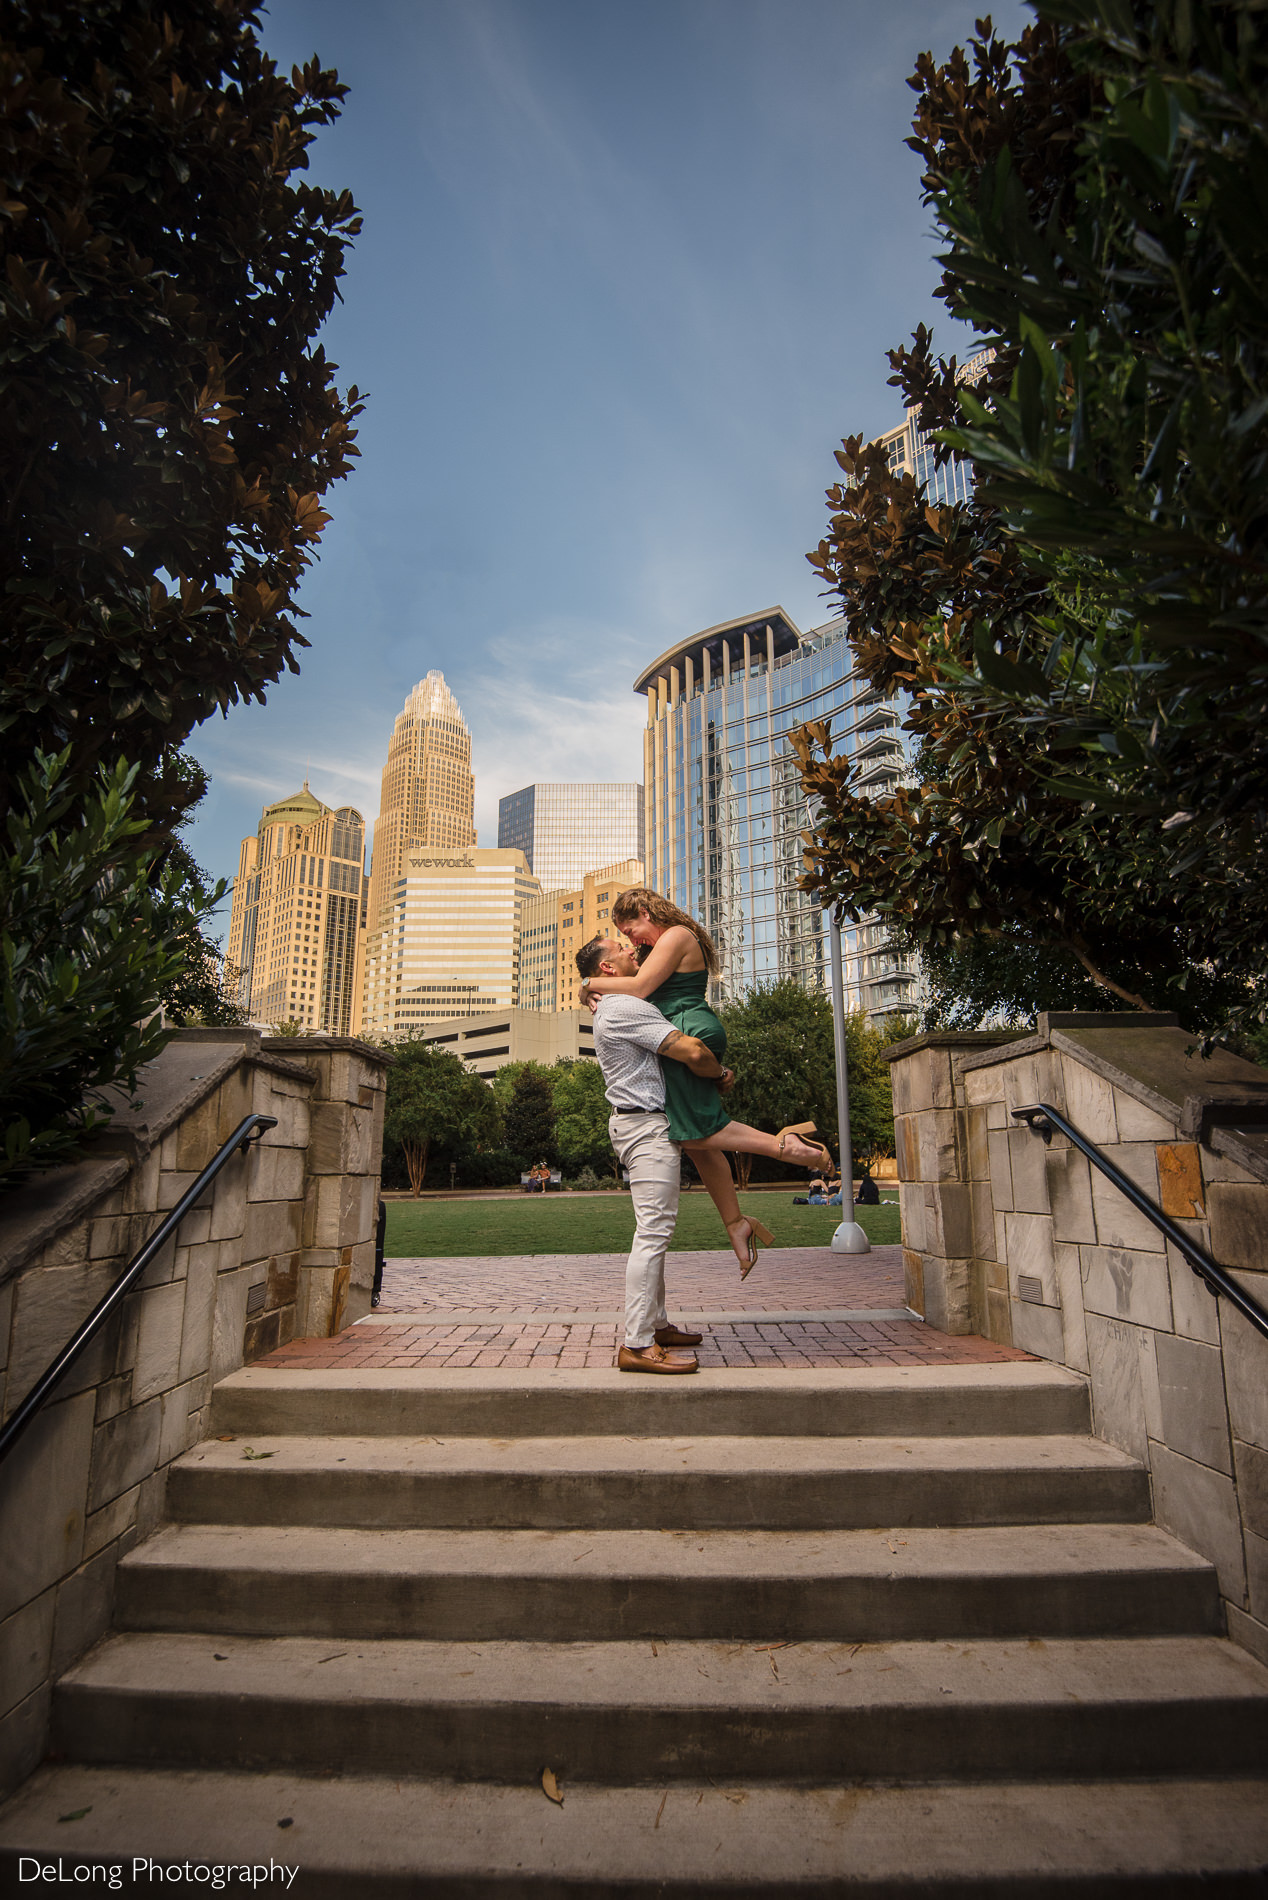 Man lifting woman up having fun during a Romare Bearden Park engagement session by Charlotte wedding photographers DeLong Photography